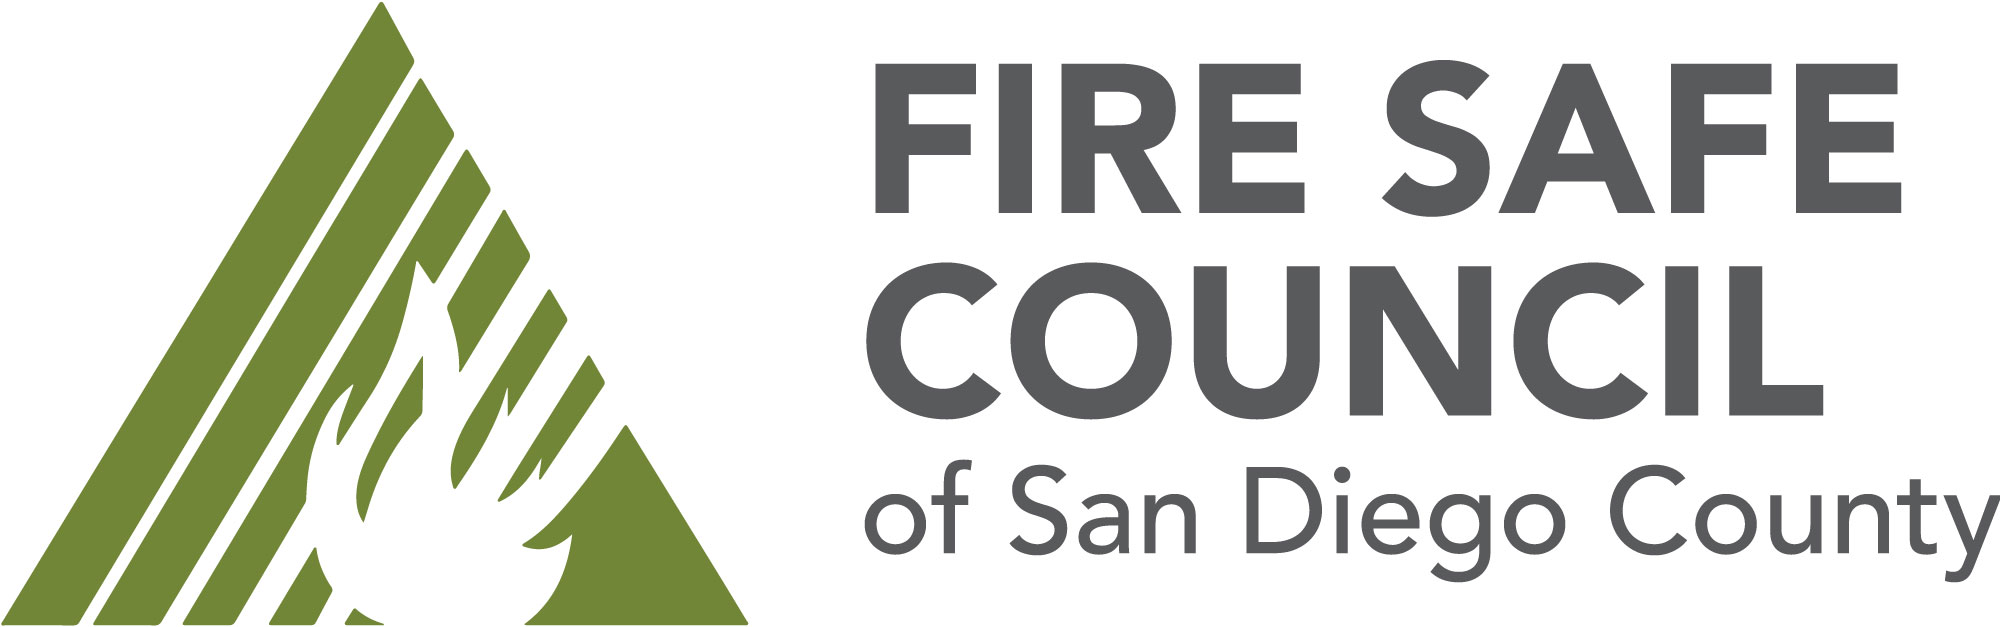 Fire Safe Council of San Diego County